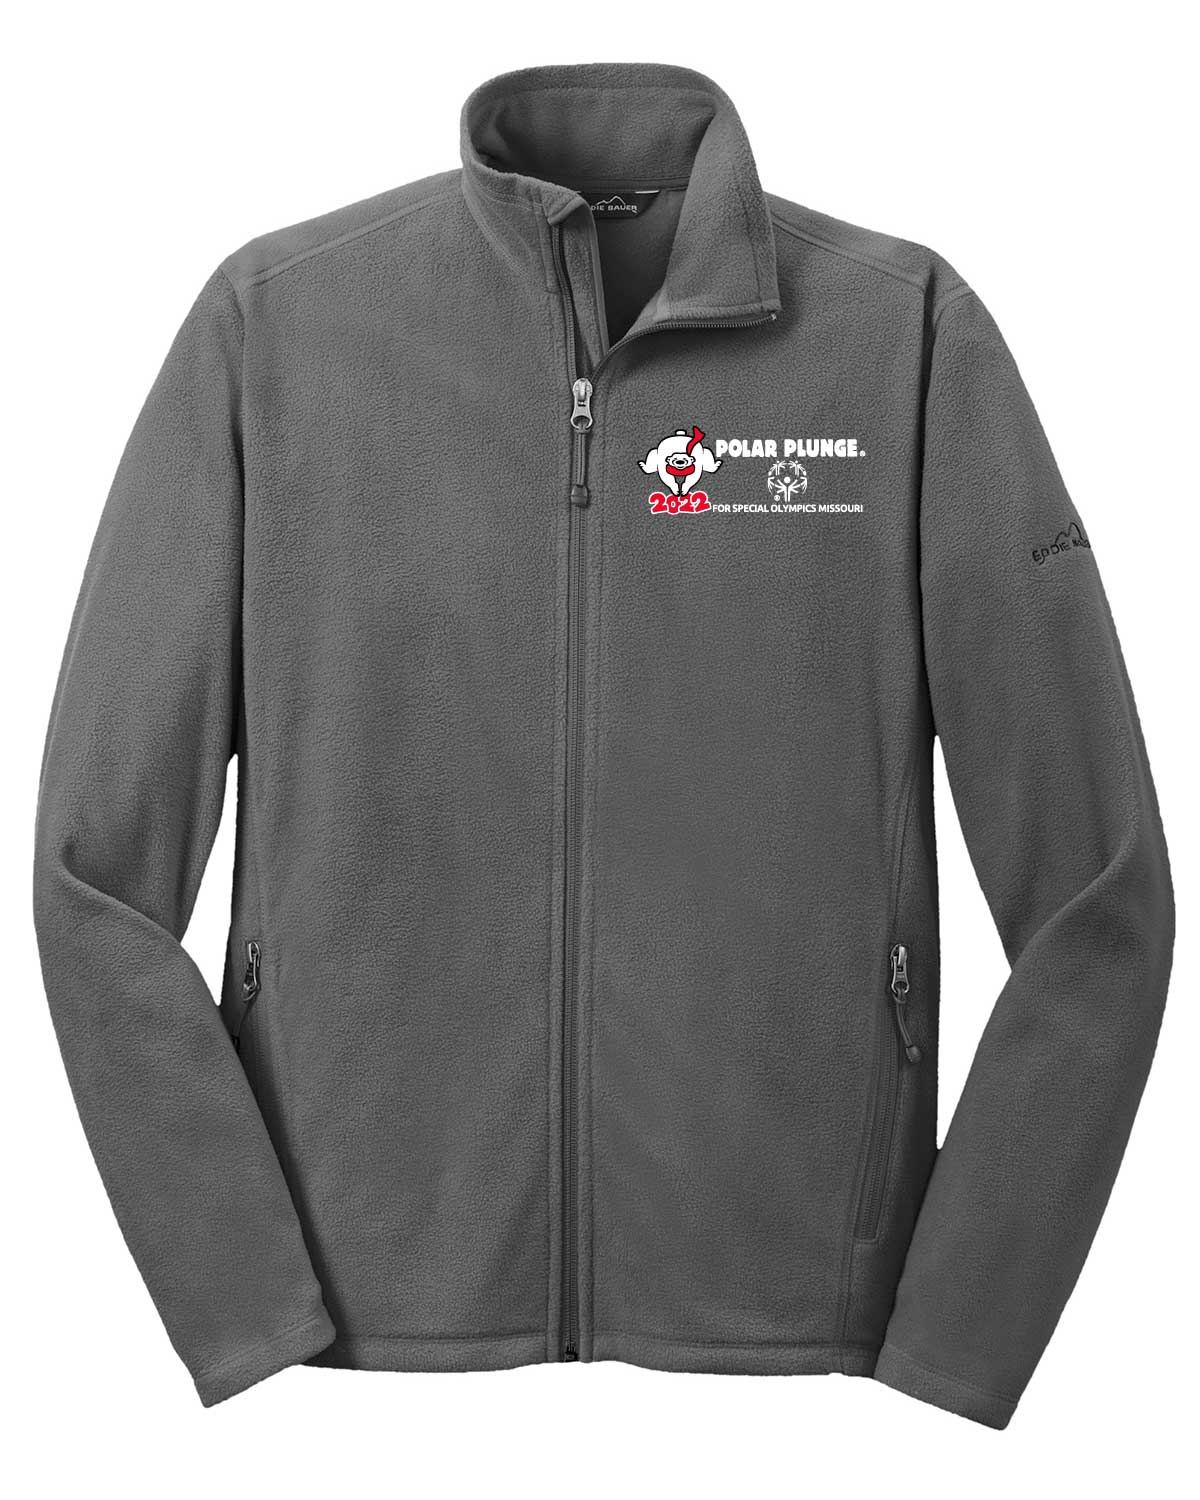 Gray jacket with the 2022 Plunge logo